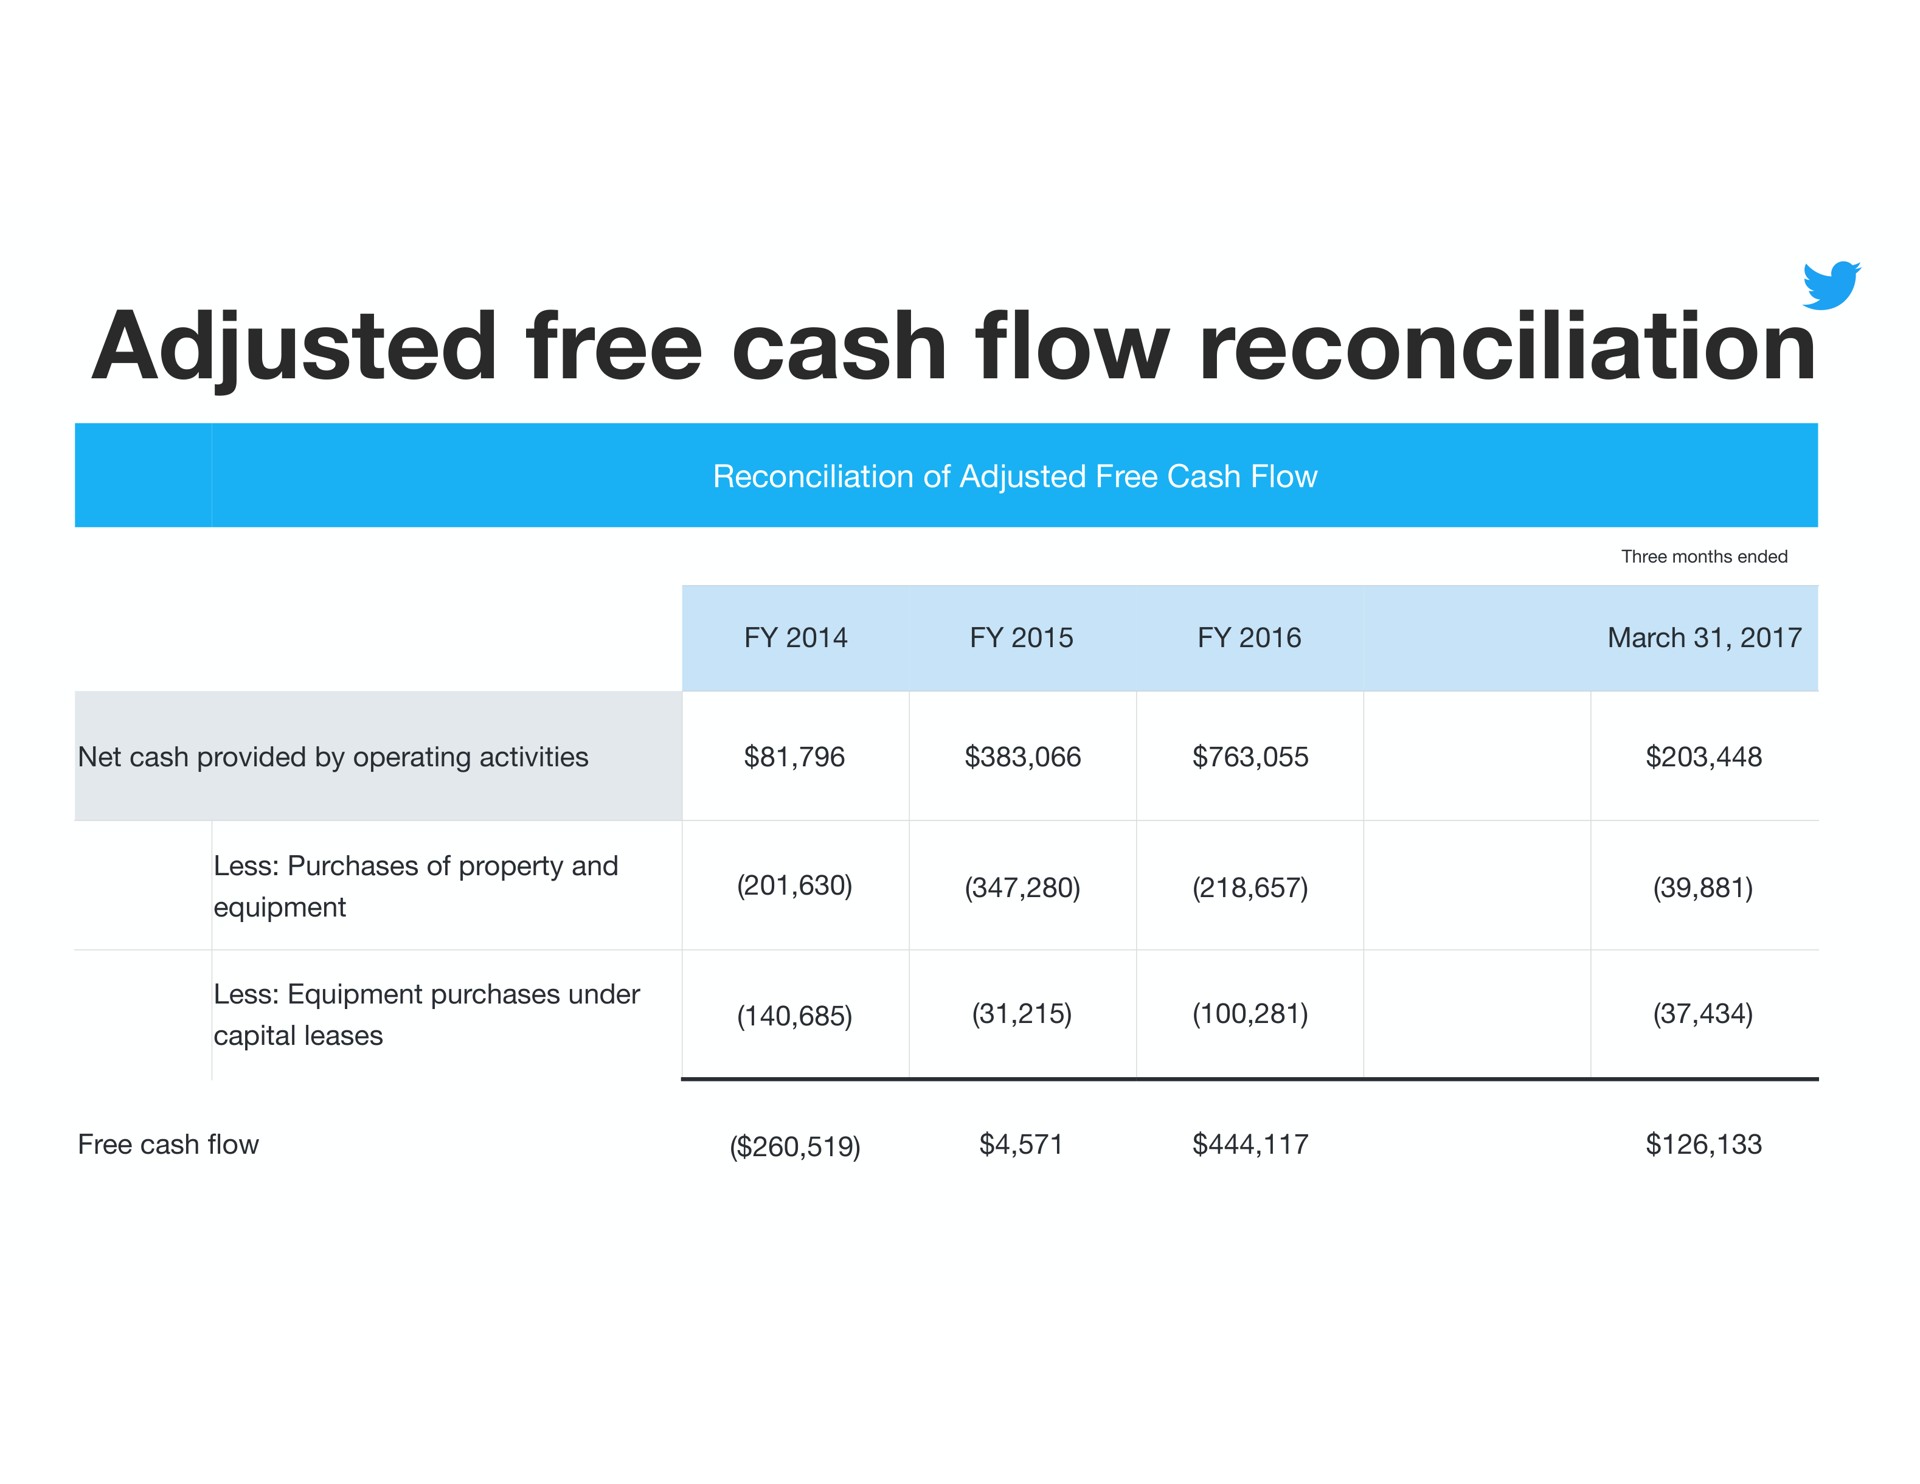 adjusted free cash reconciliation flow | Twitter